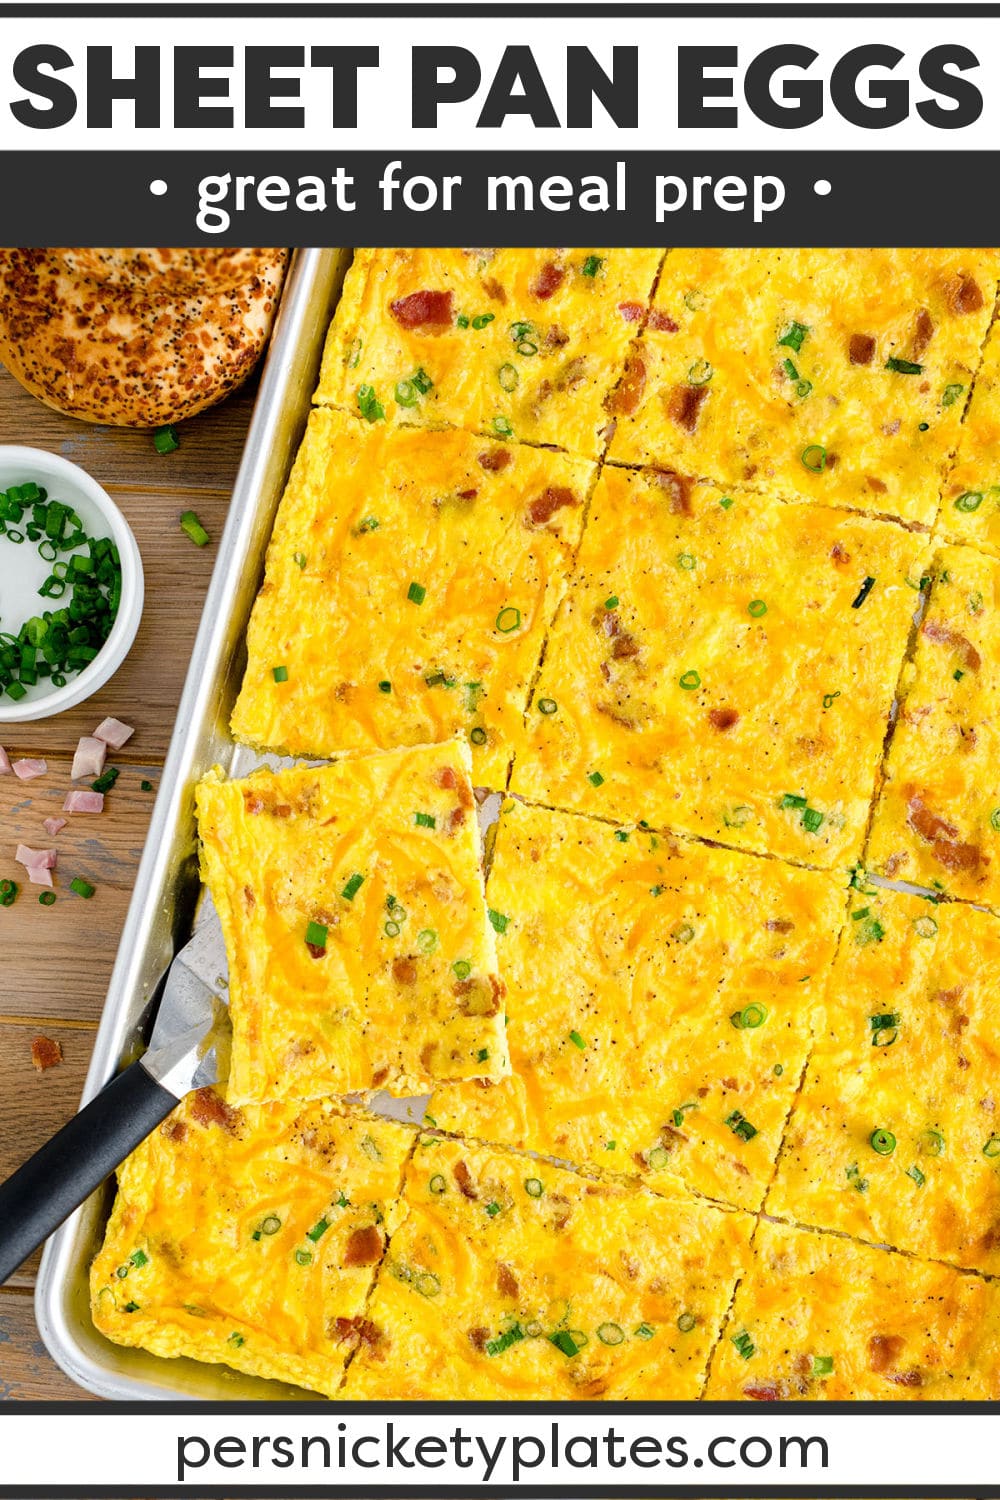 This sheet pan eggs recipe is perfect for serving a crowd or for meal prep. It's made with eggs, bacon, ham, cheese, and onions all baked on one sheet in under 30 minutes. | www.persnicketyplates.com